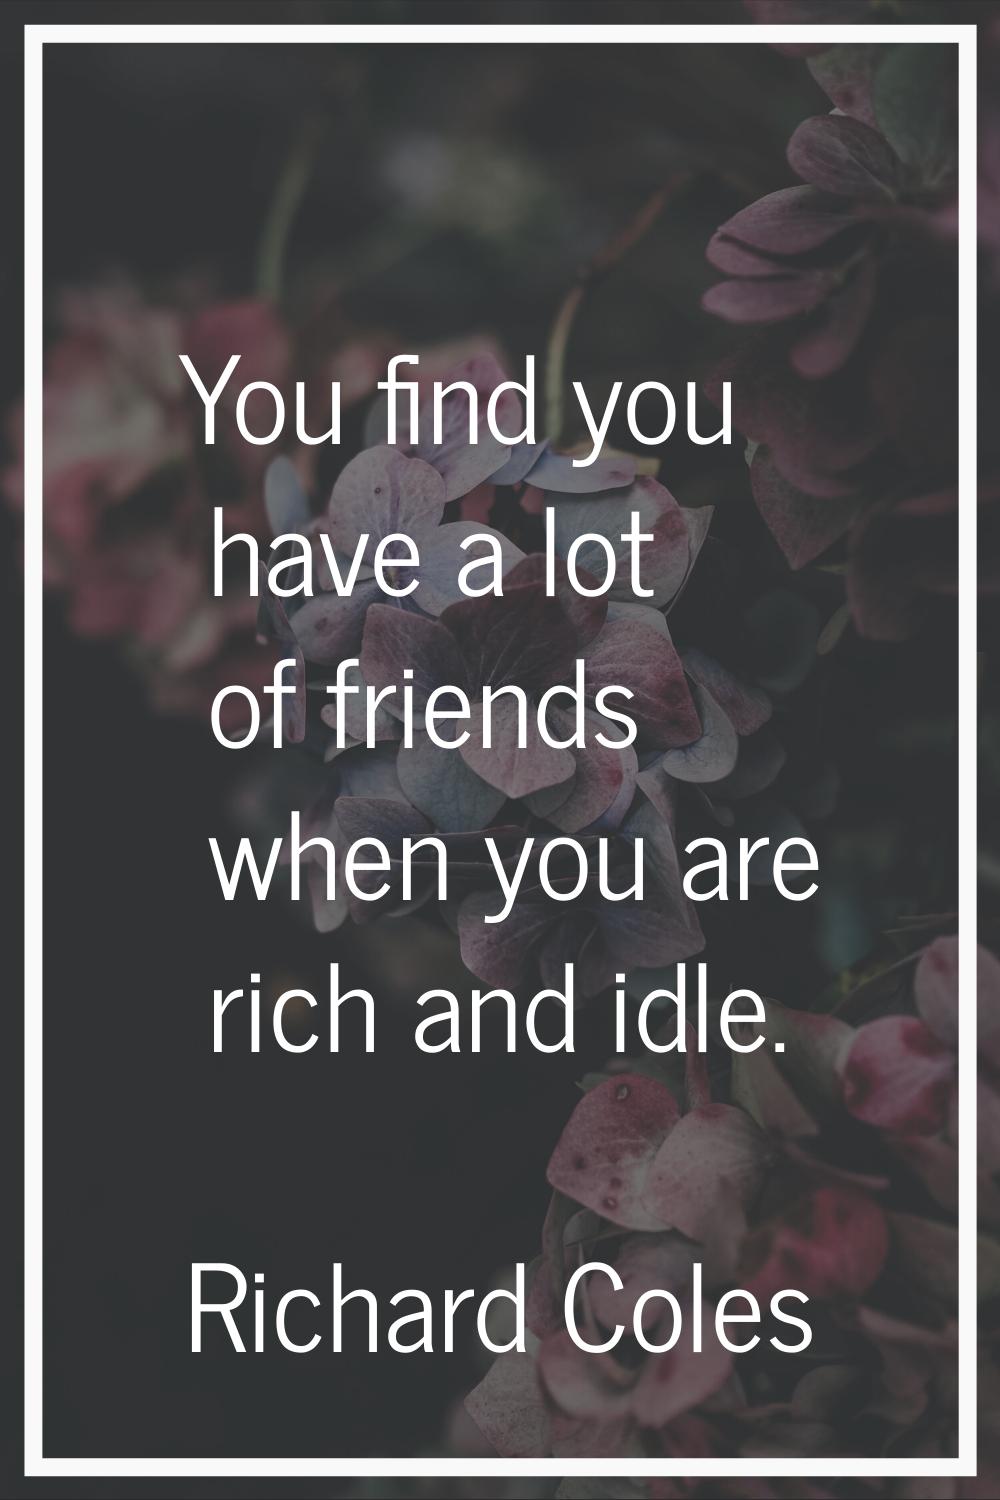 You find you have a lot of friends when you are rich and idle.